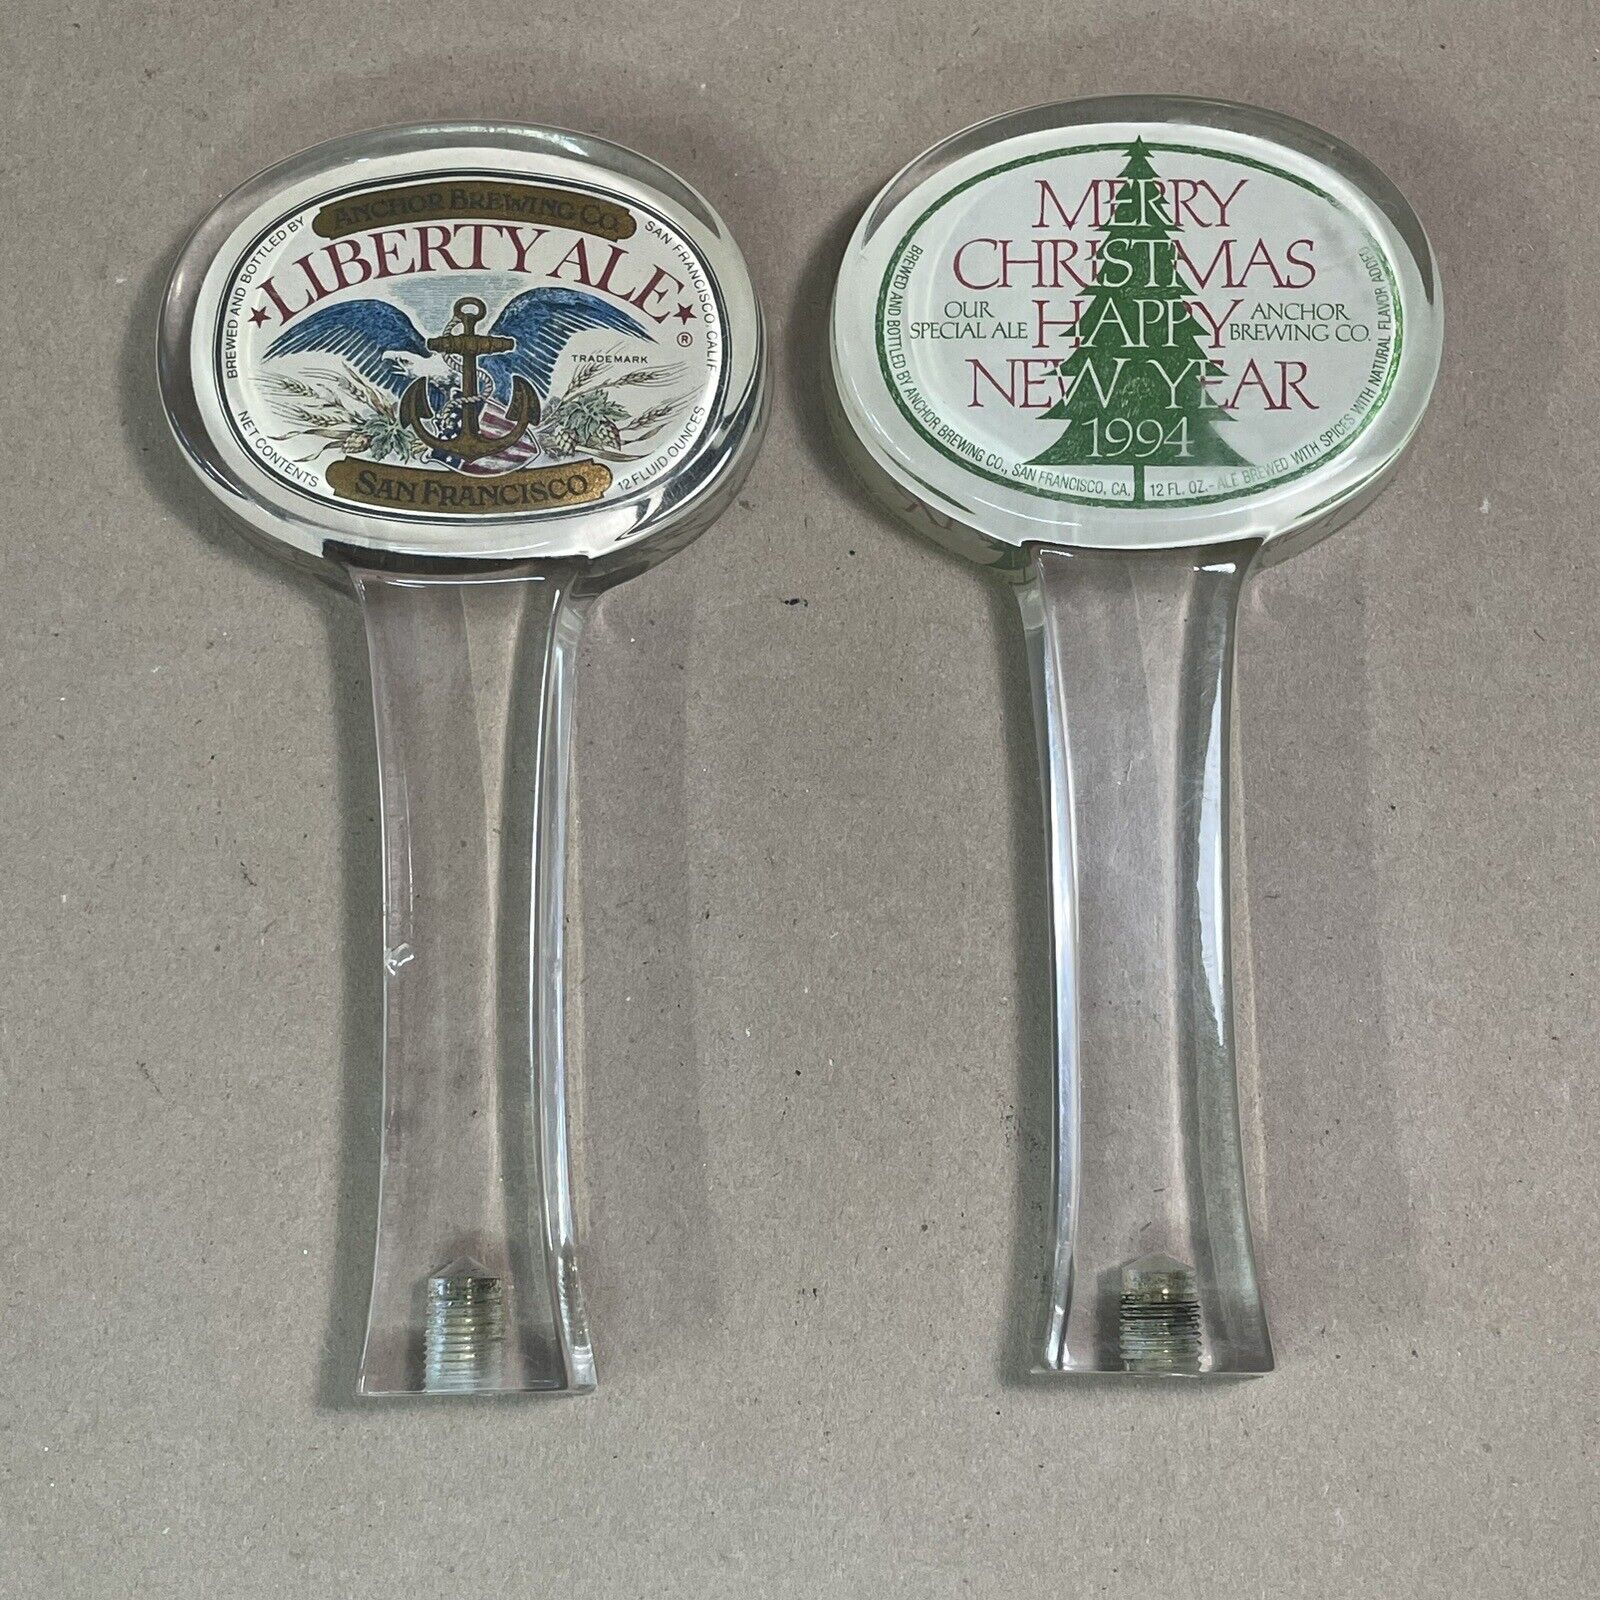 Vintage Anchor Brewing Co Tap Handles Liberty Ale Our Special Ale 1994 Lot of 2